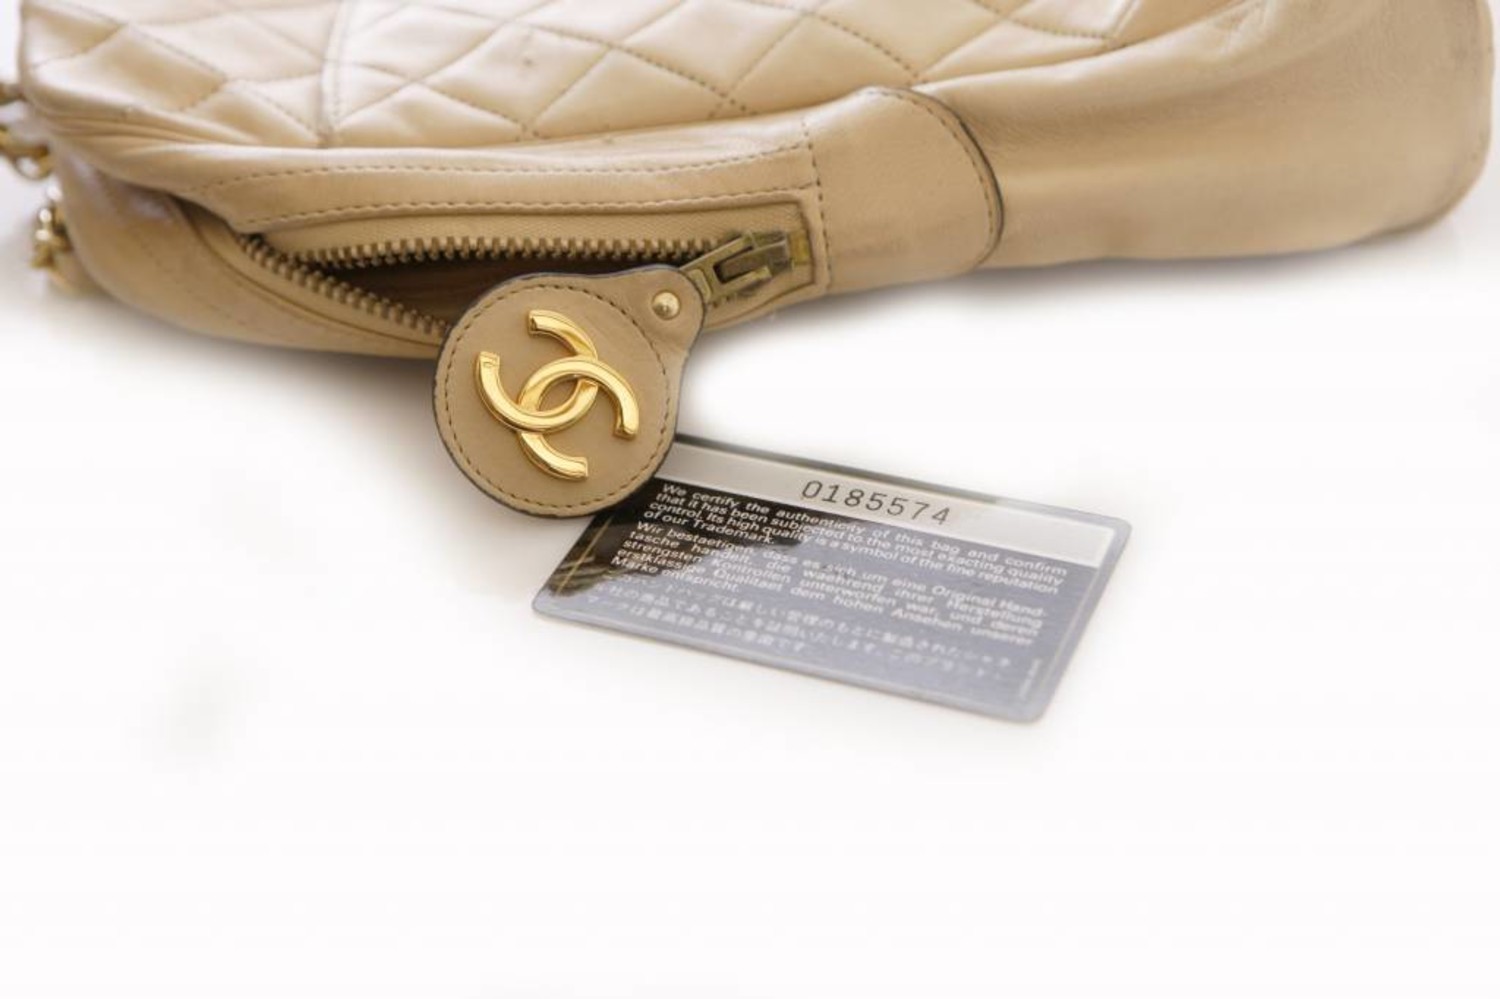 Chanel, timeless nude leather laptop bag with golden hardware